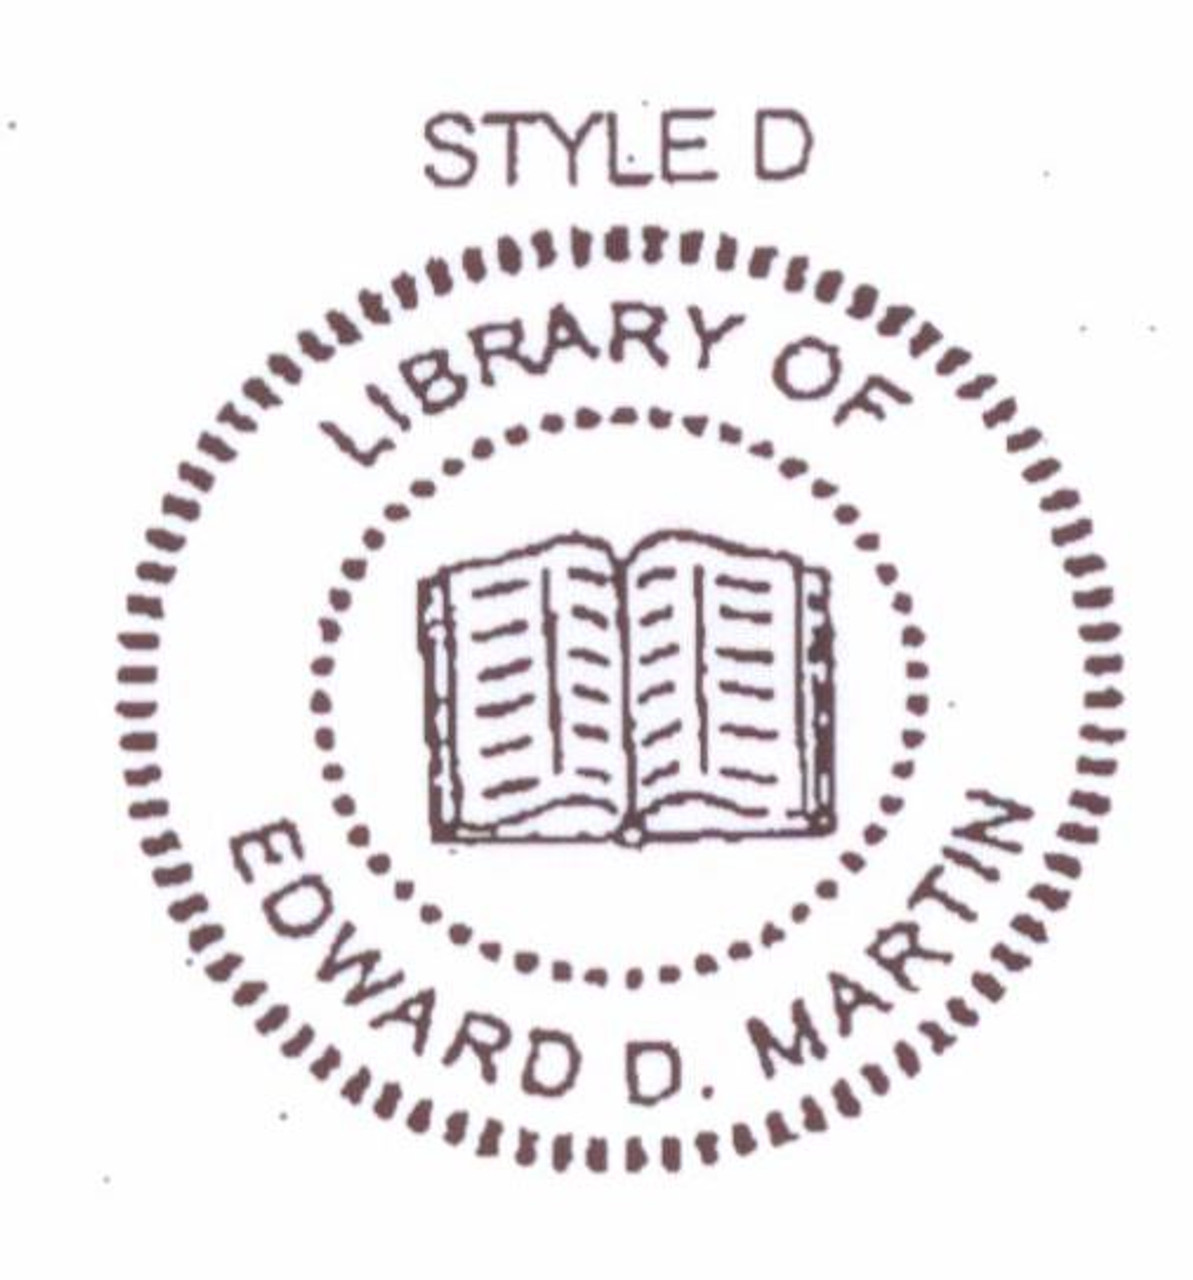 Create Your Own Custom Library Stamps